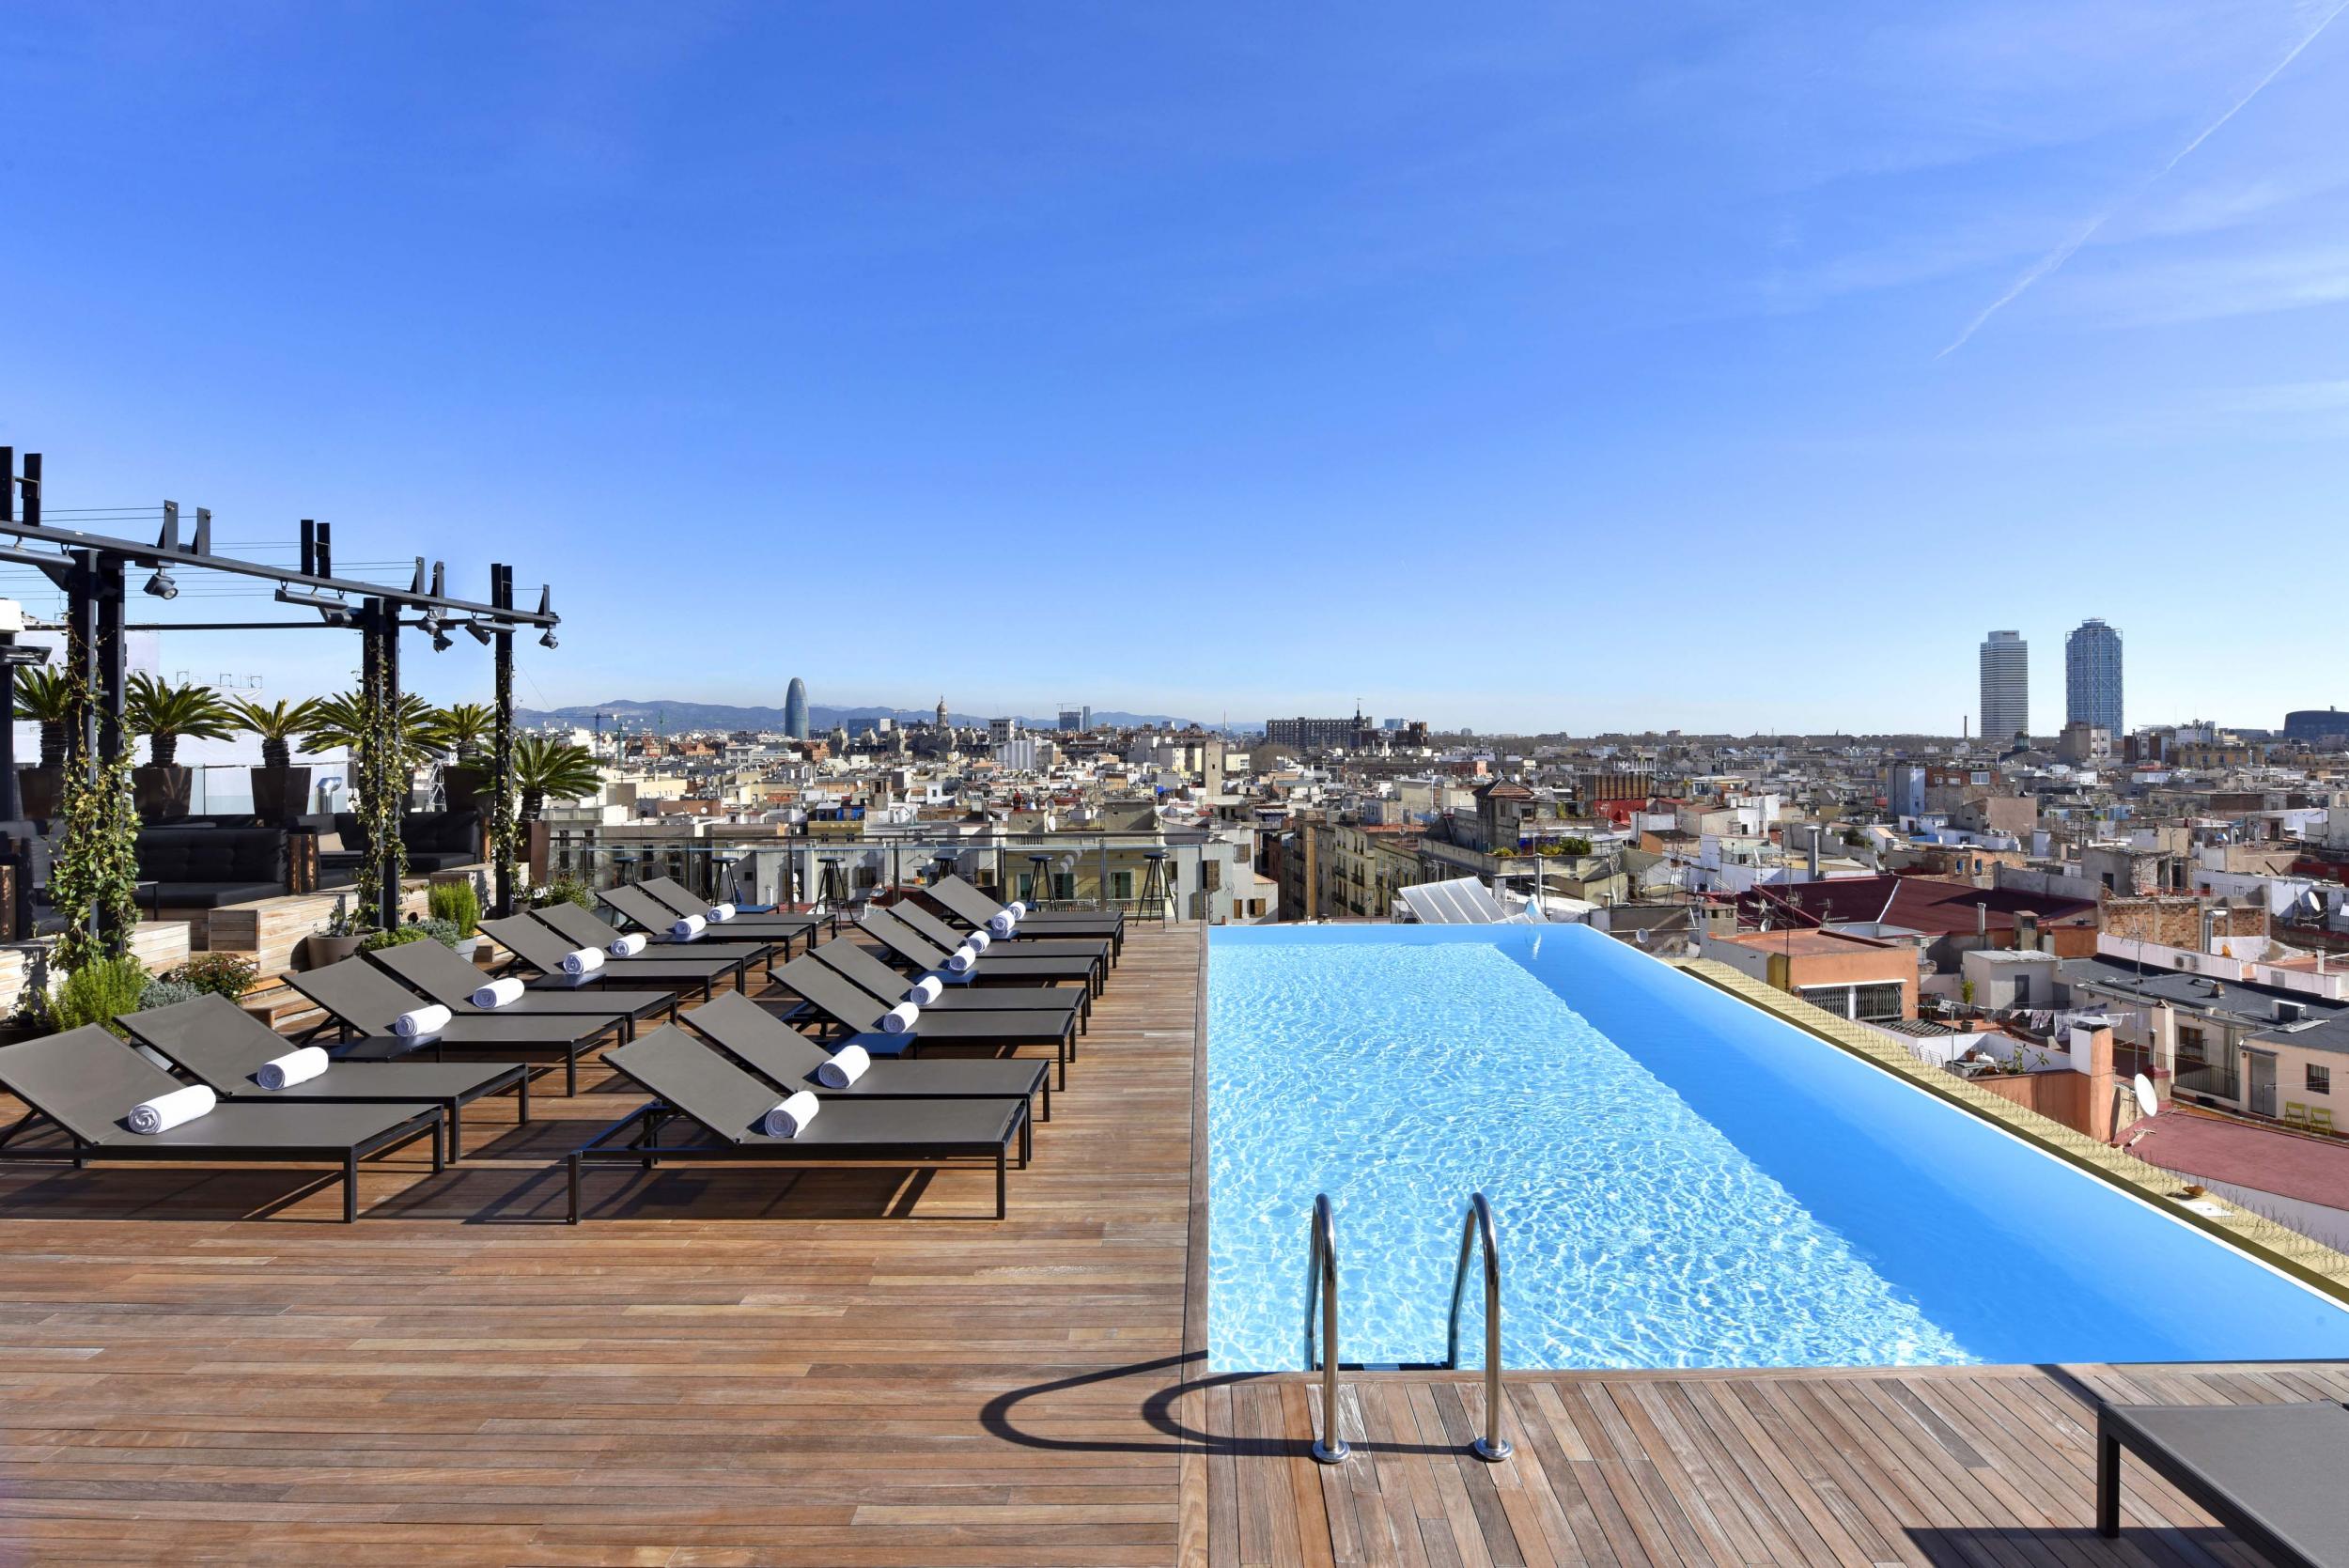 Take in the views from the Grand Hotel's rooftop infinity pool